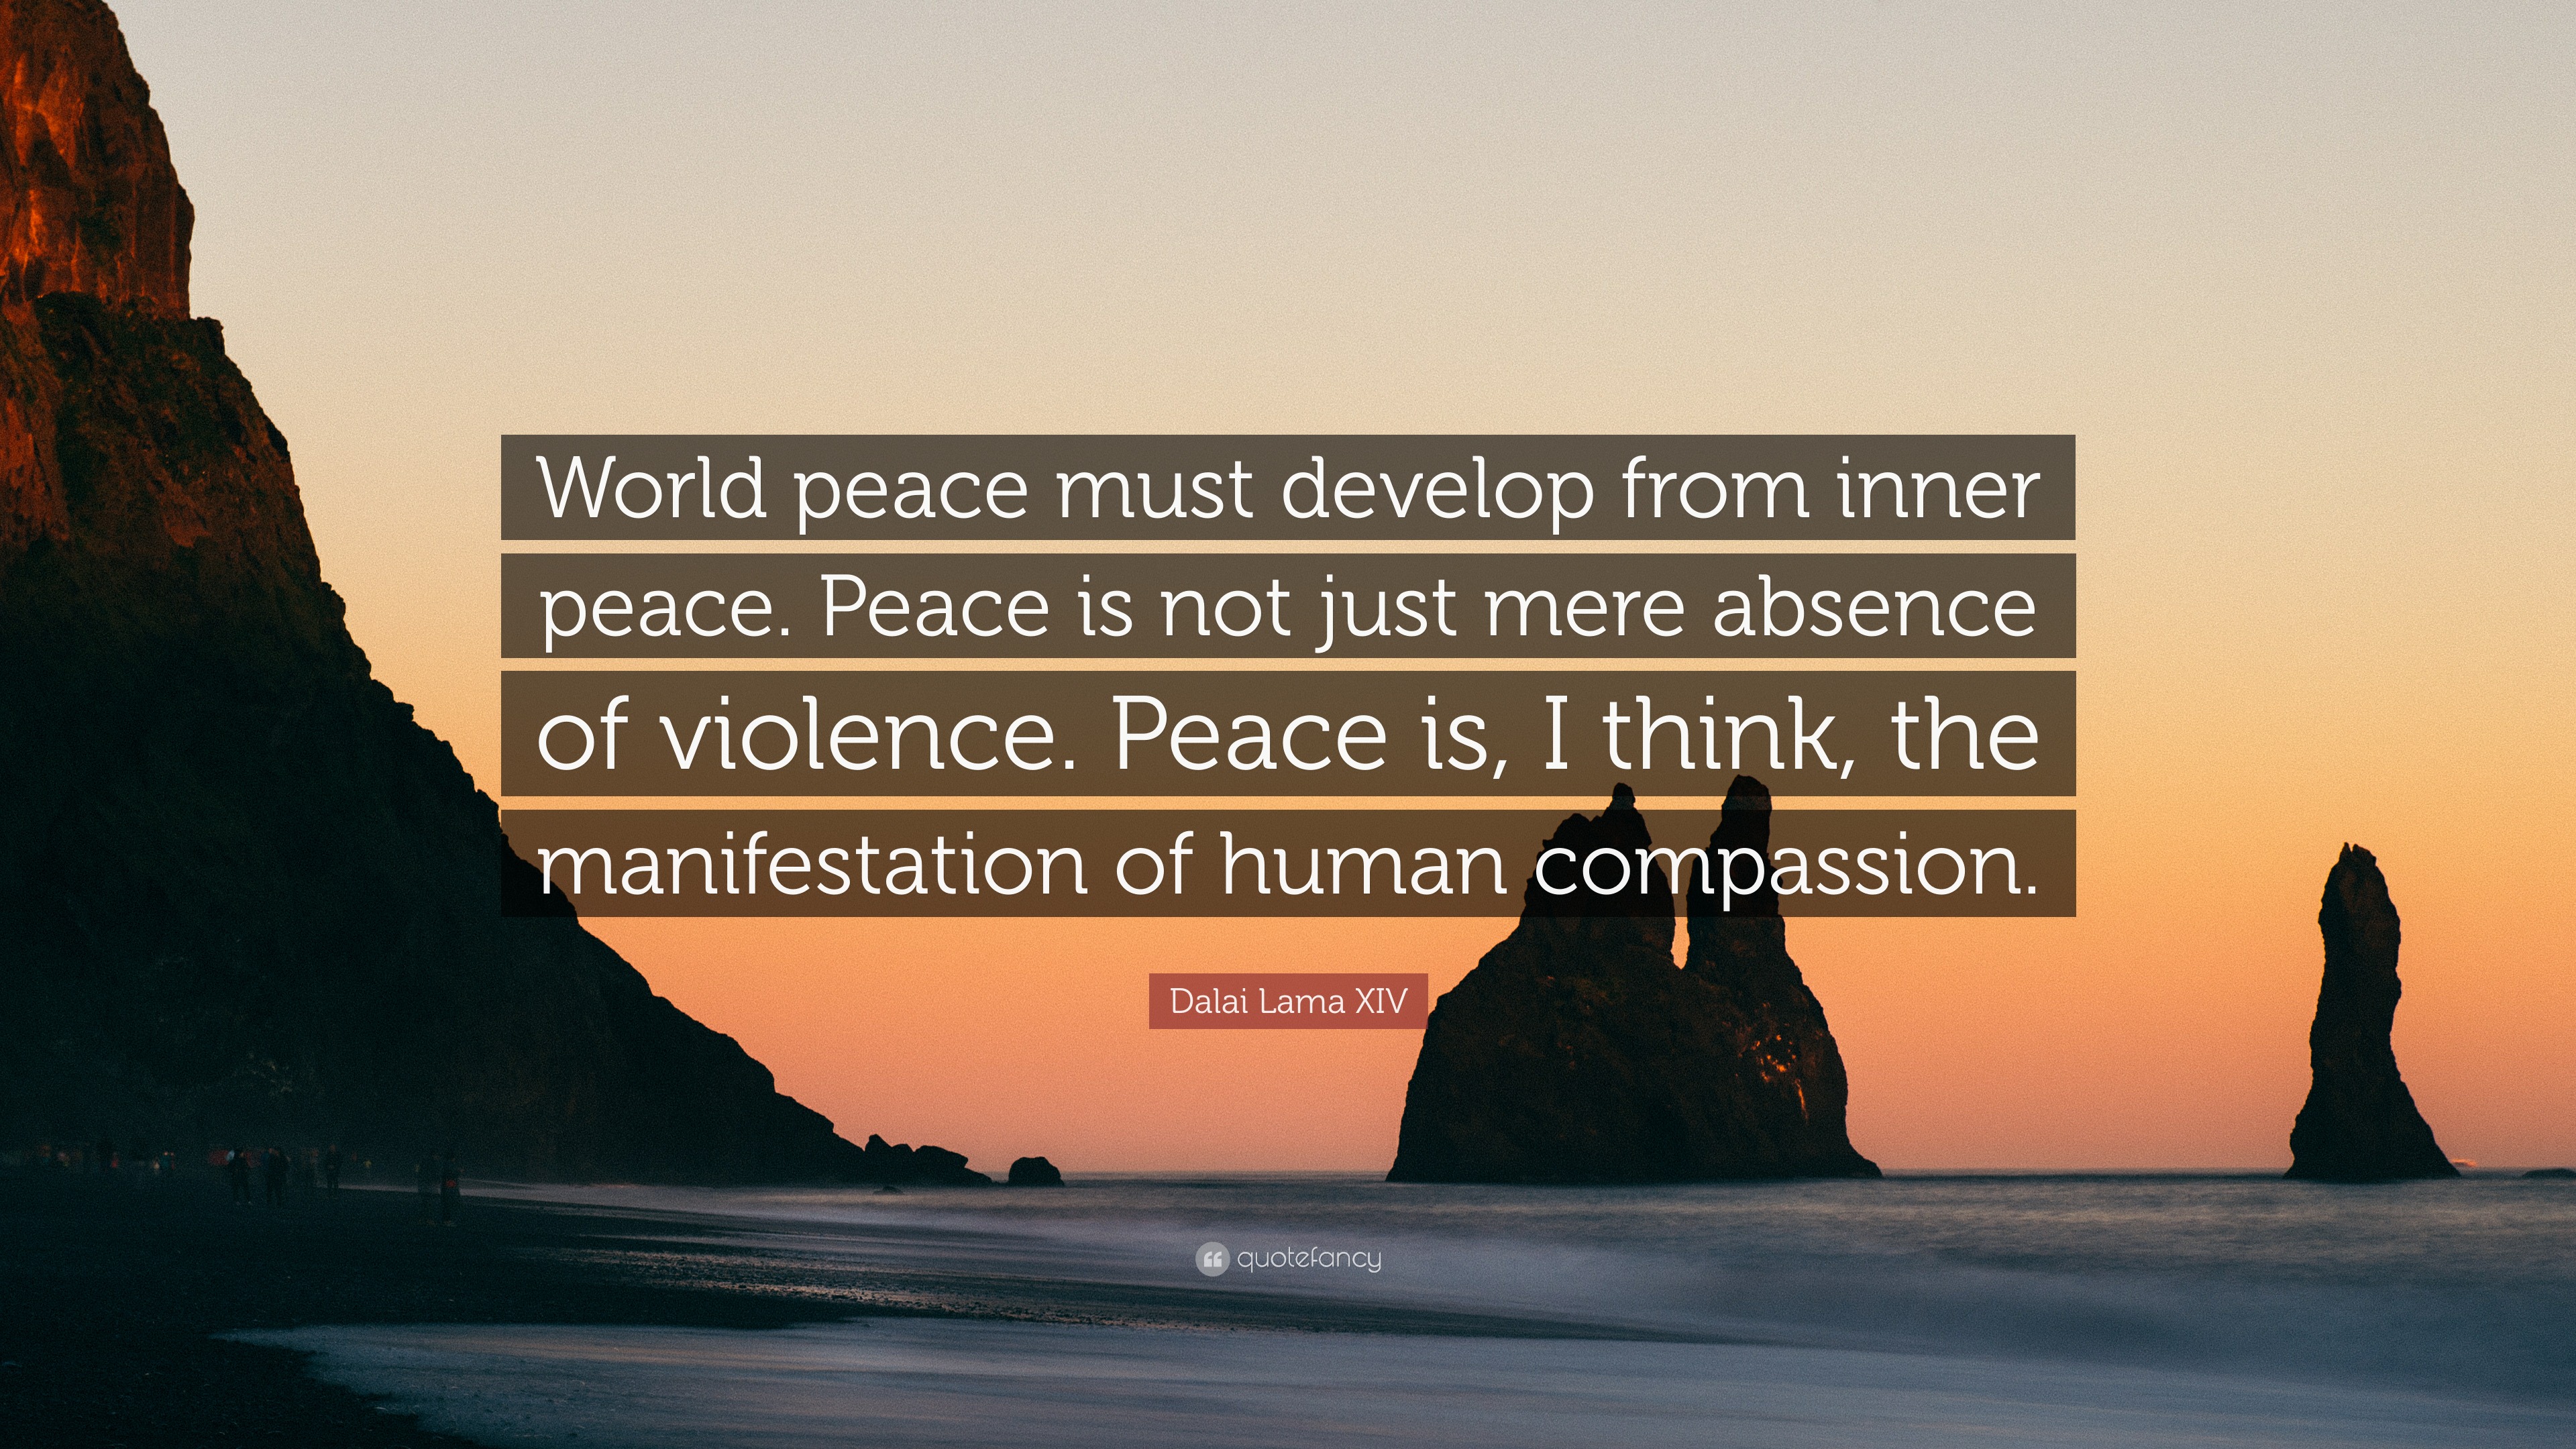 Dalai Lama Xiv Quote “world Peace Must Develop From Inner Peace Peace Is Not Just Mere Absence